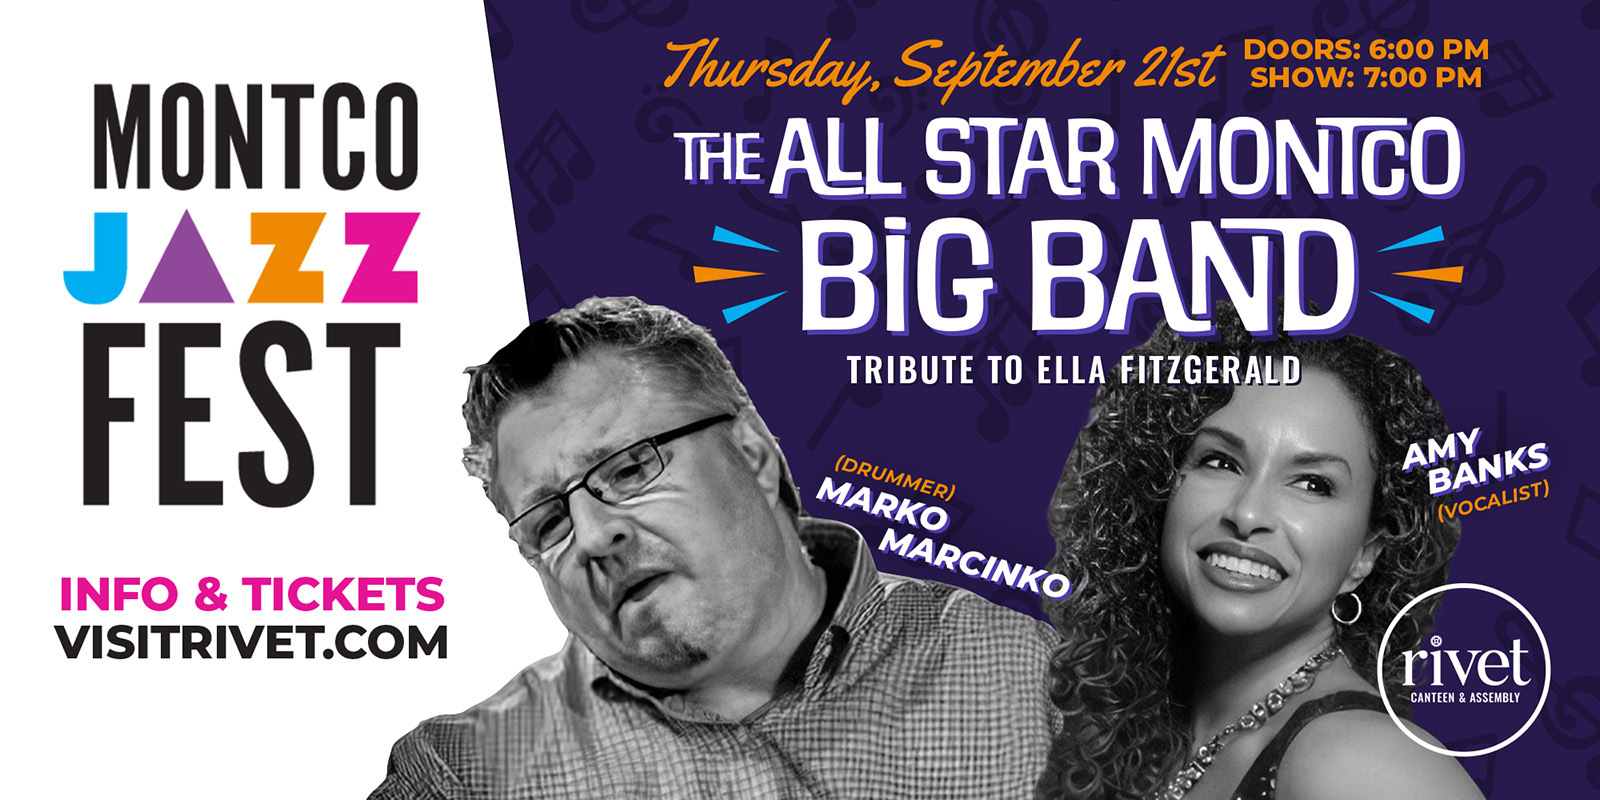 The All Star Montco Big Band with Amy Banks and Marko Marcinko at Rivet: Canteen & Assembly on Thursday, September 21st, 2023. Doors at 6:00 PM. Show: 7:00 PM. Be there!